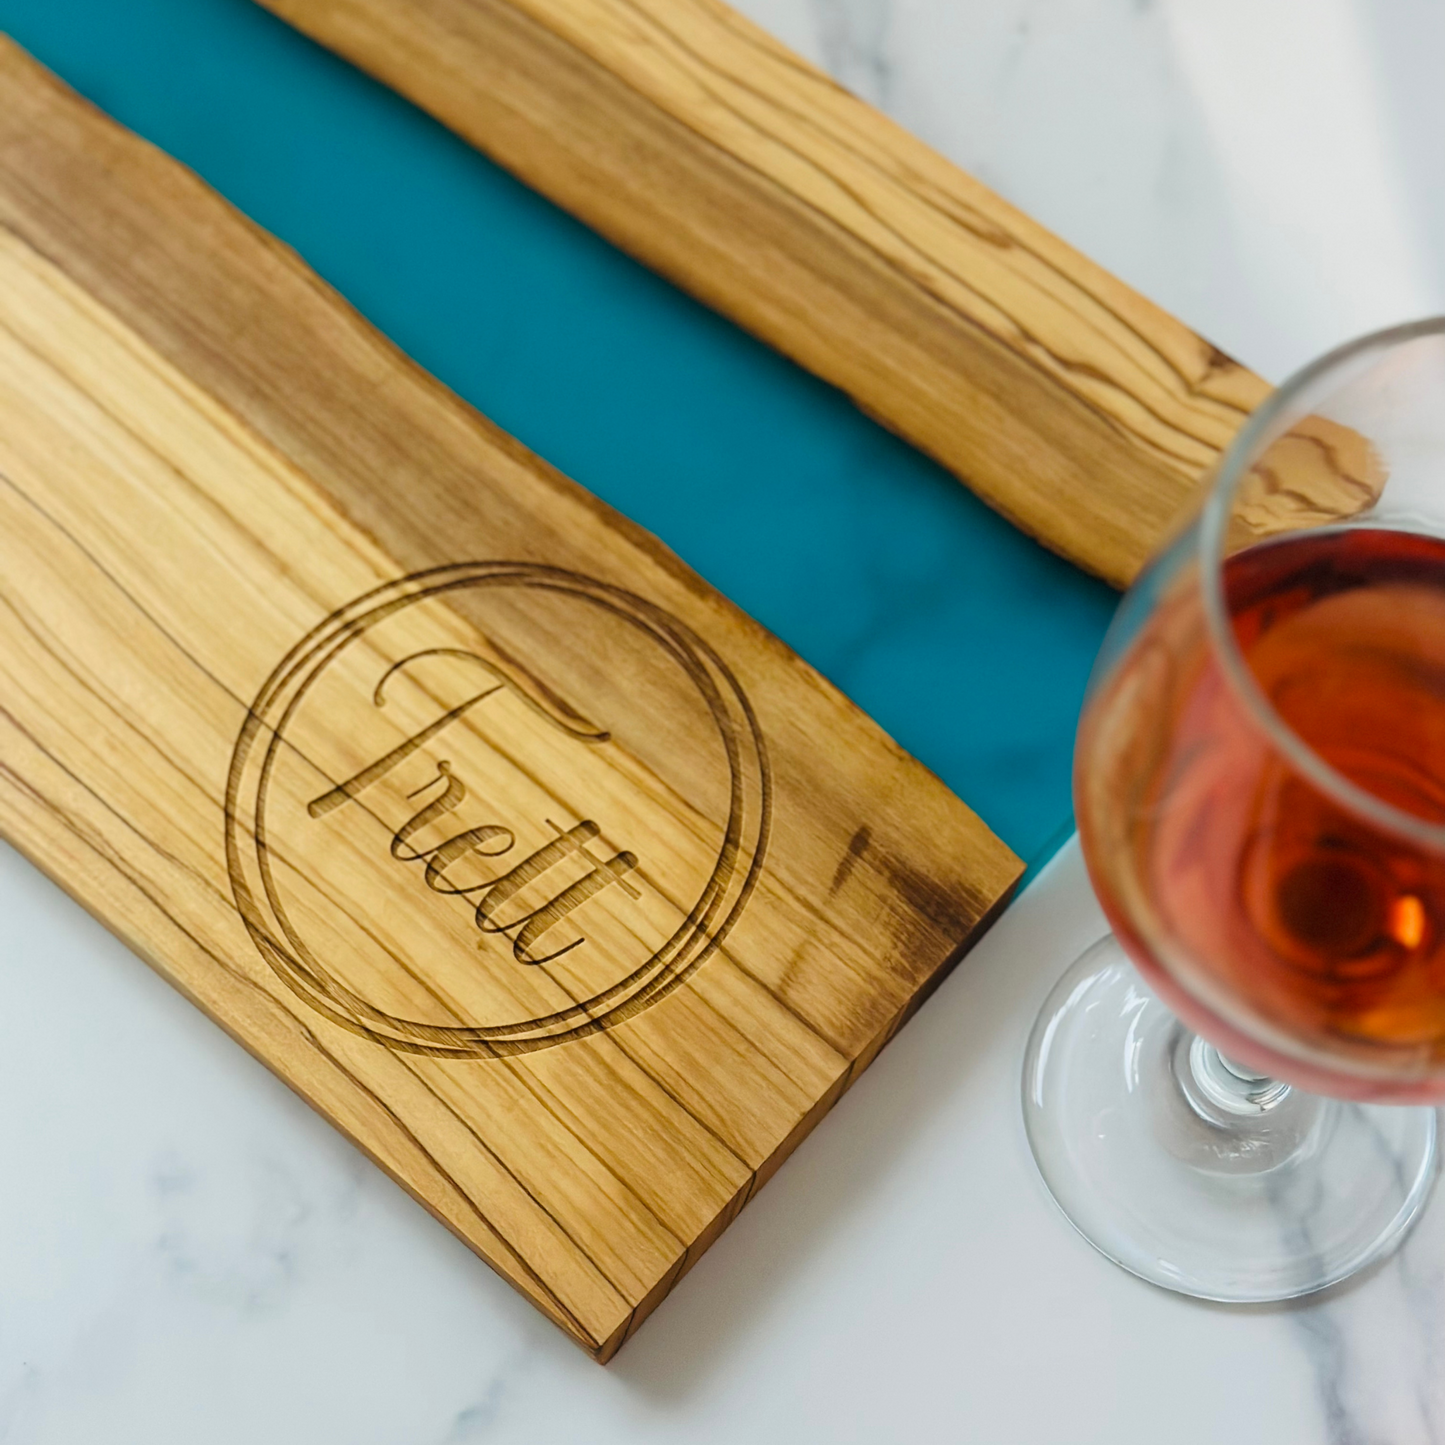 Resin and Olive Wood Personalized Cutting Board